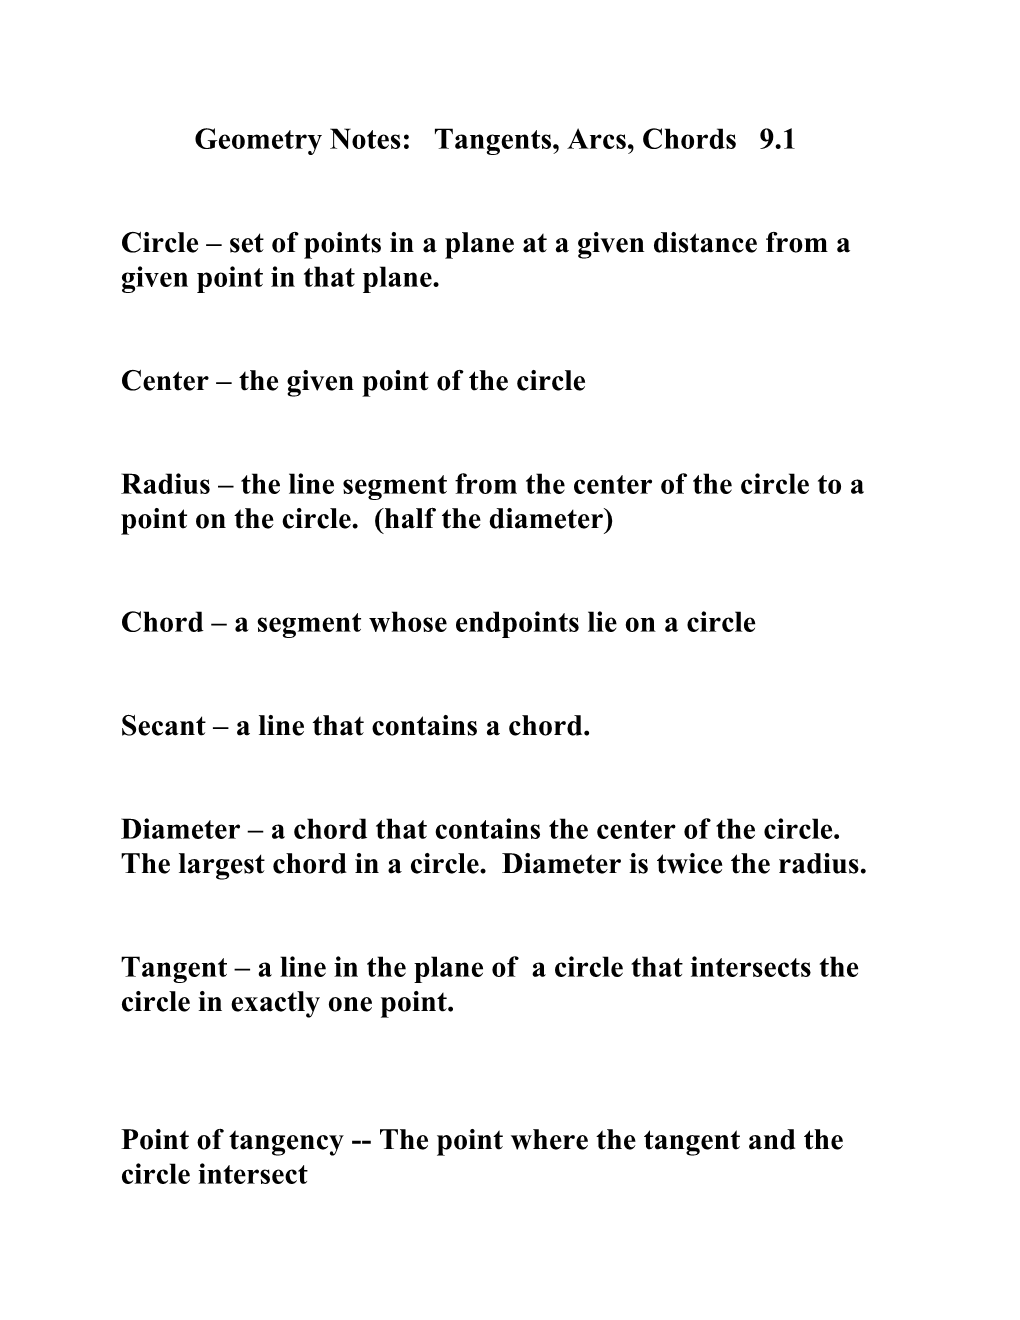 Geometry Notes Tangents Arcs, Chords 9